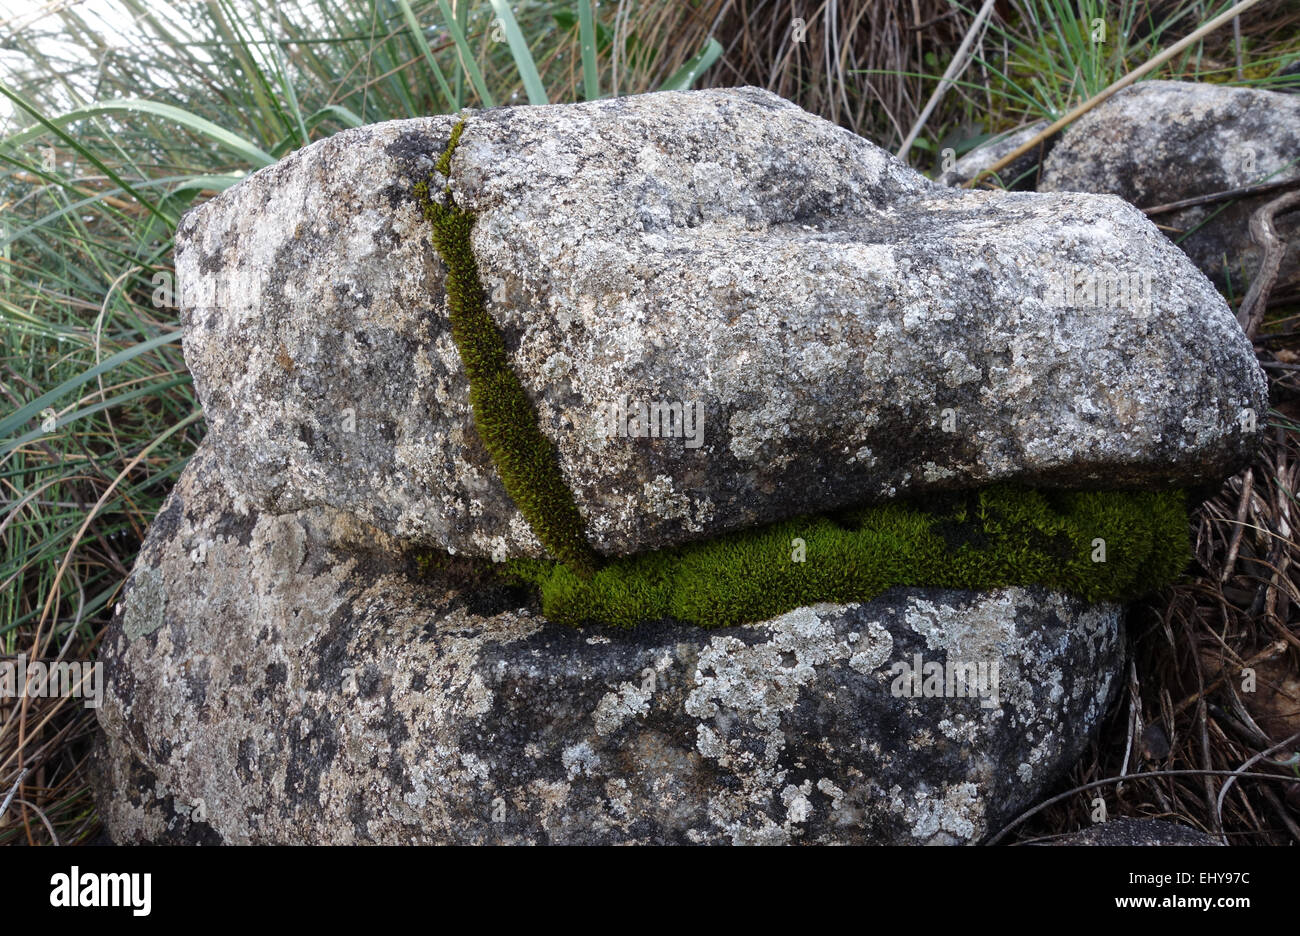 Peat moss, growing in a crevice of a rock, Sphagnum, Spain. Stock Photo